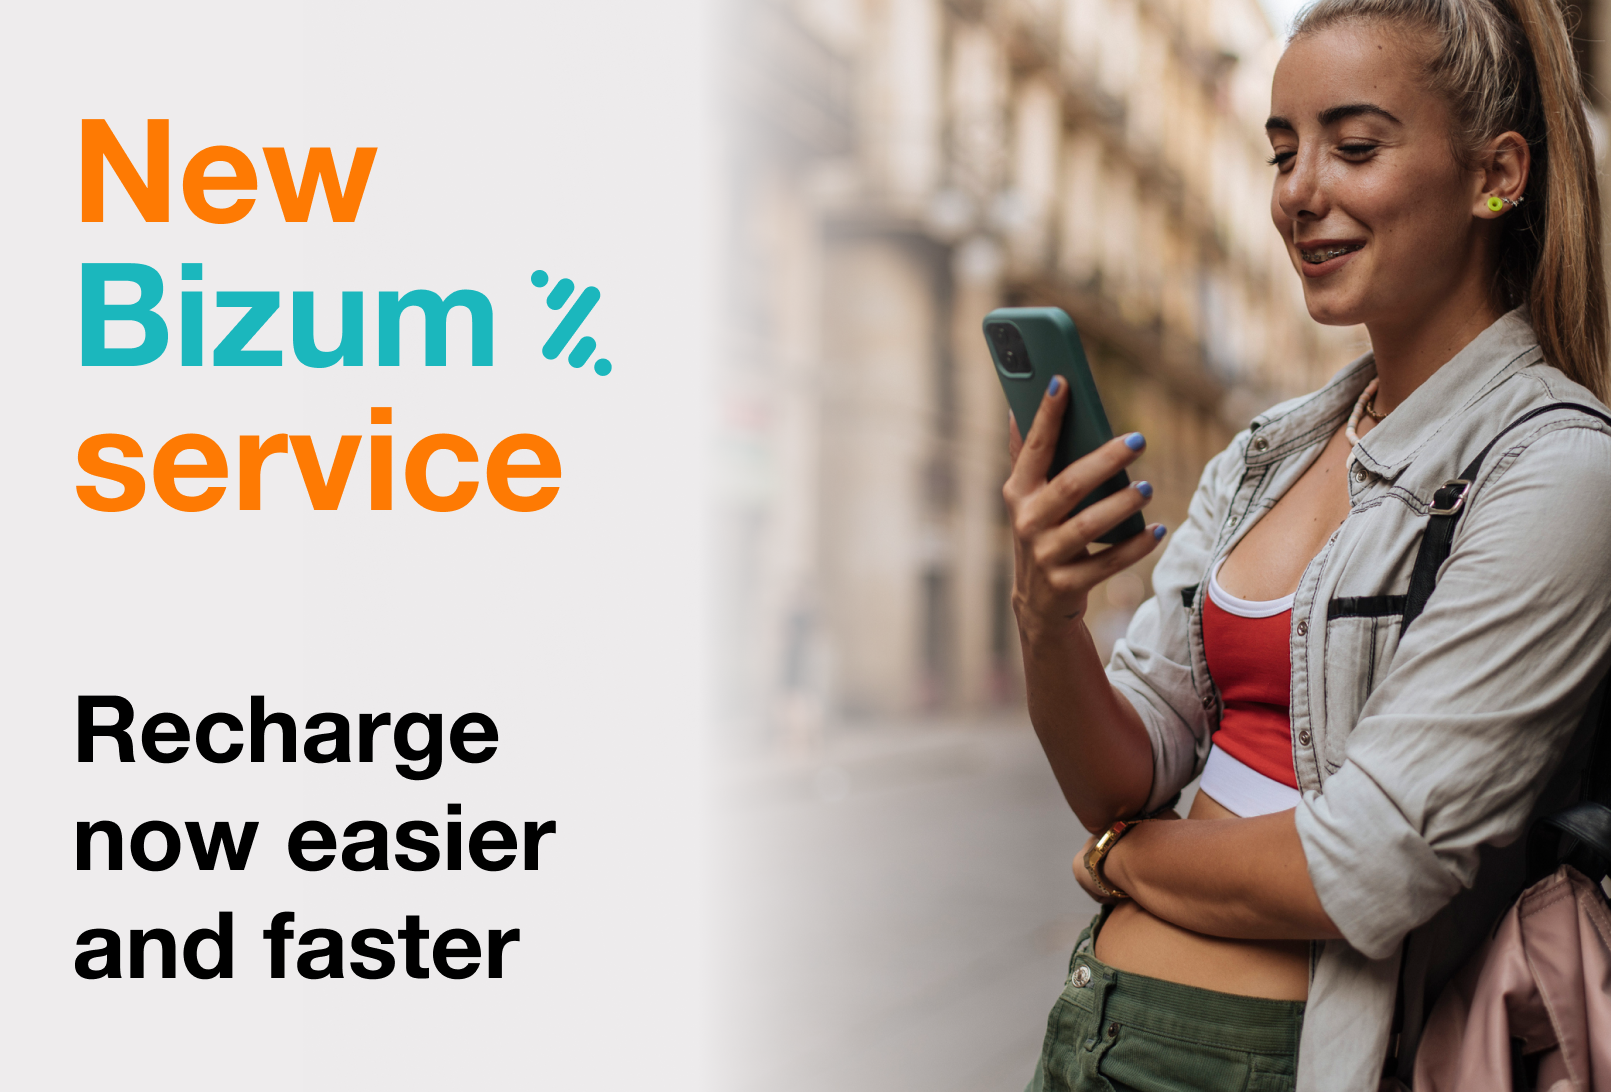 Top up now easier and faster